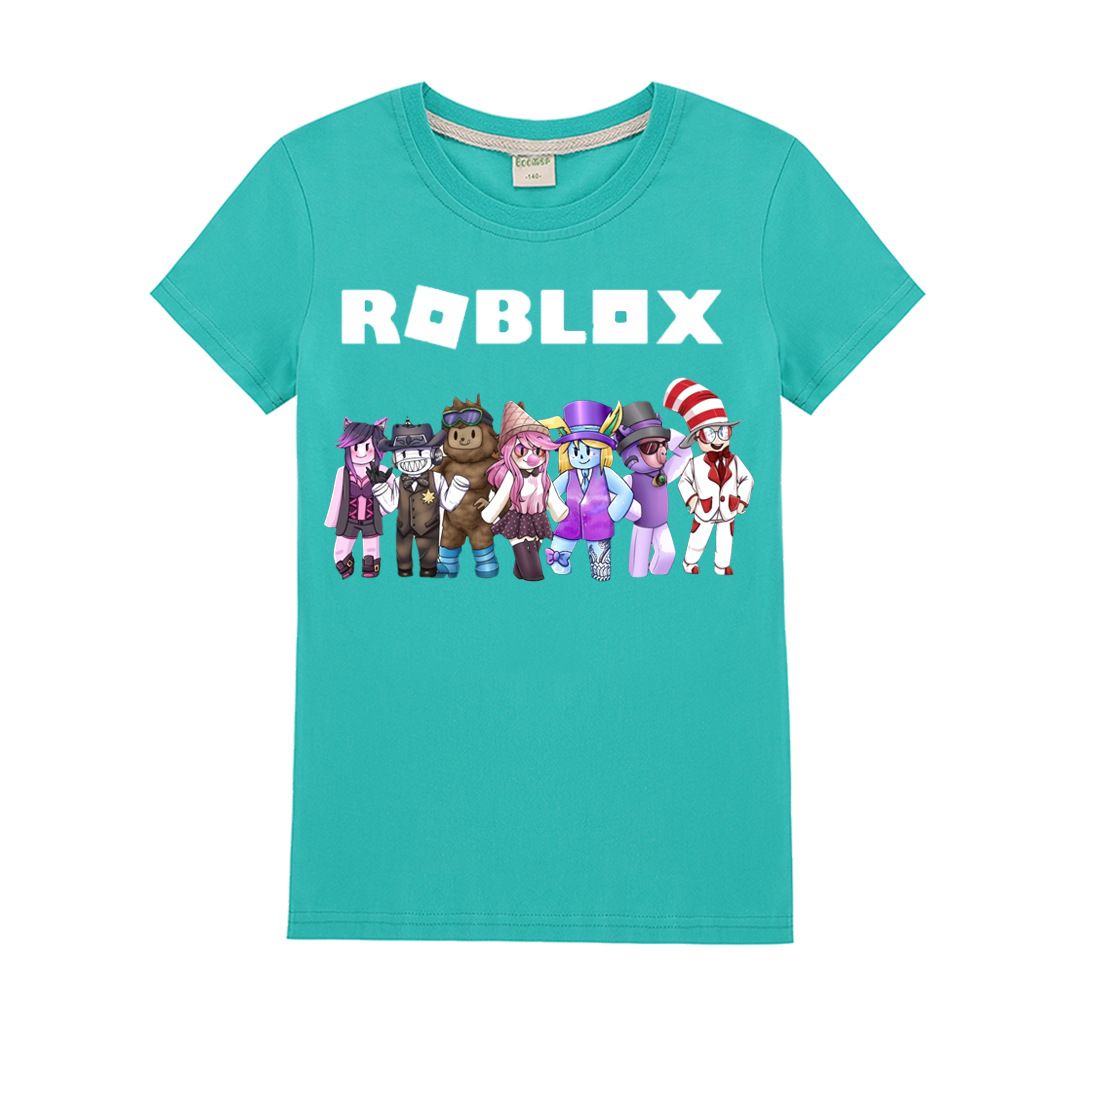 2020 Summer 2020 Roblox Tees Kids Designer Clothes Boys Teenage Girls Clothing Cotton Short Sleeve Girls Shirt T Shirt From Baby0512 13 77 Dhgate Com - cool roblox outfits for girls bux ggaaa